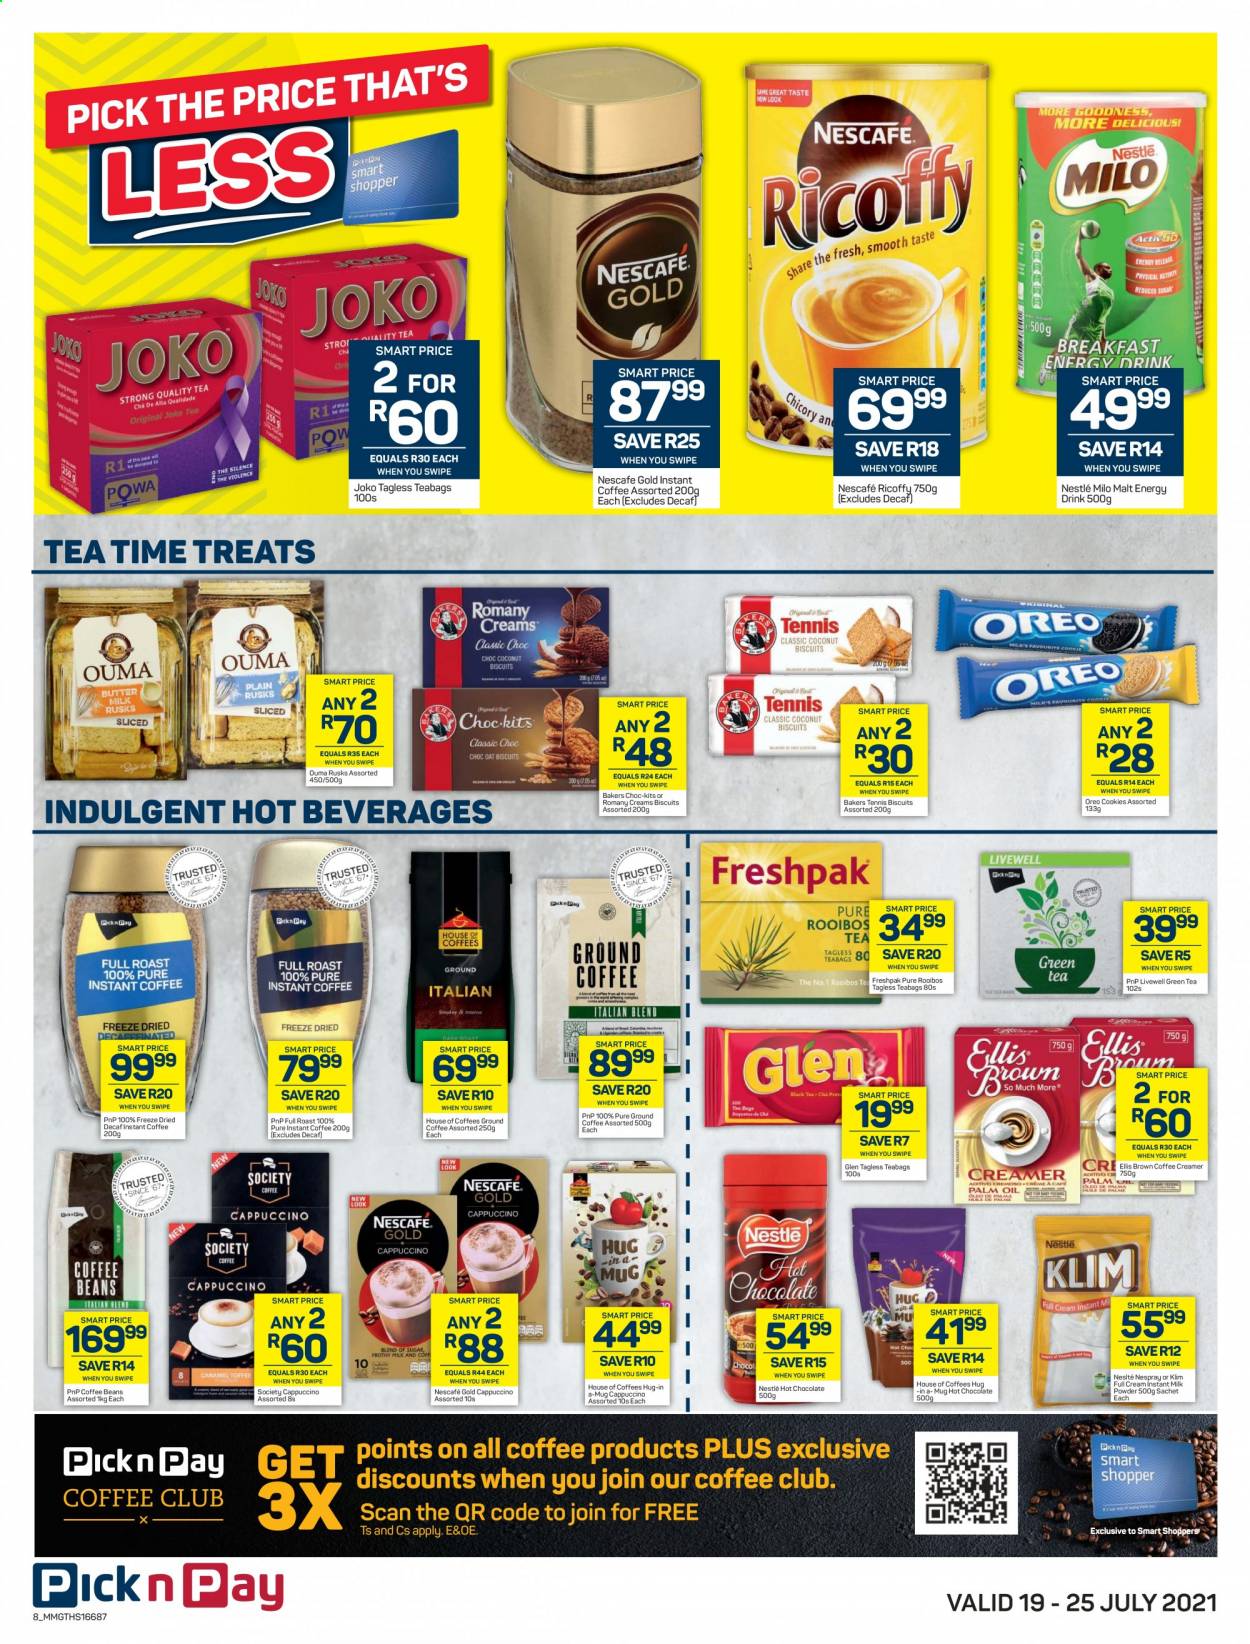 Pick n Pay specials - 07.19.2021 - 07.25.2021. 